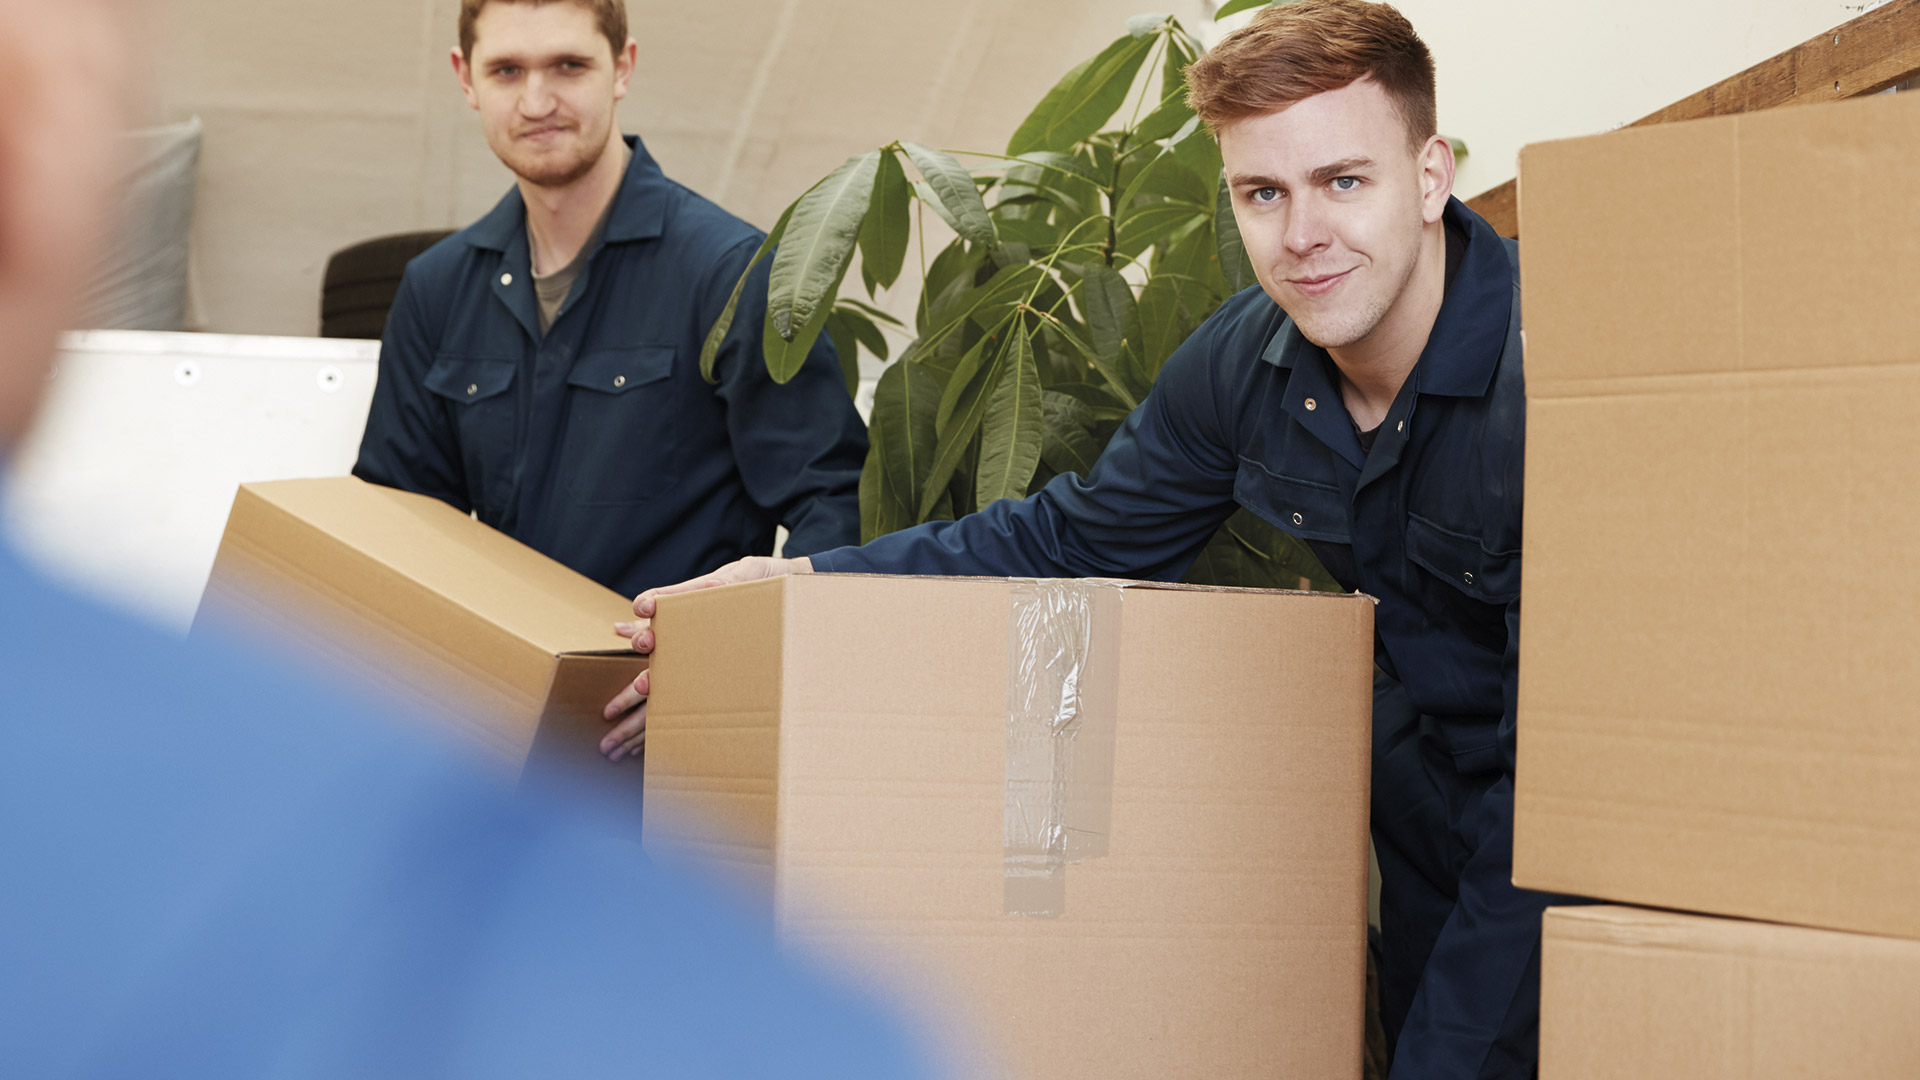 service-of-movers-for-moving-company-spring-tx.jpg